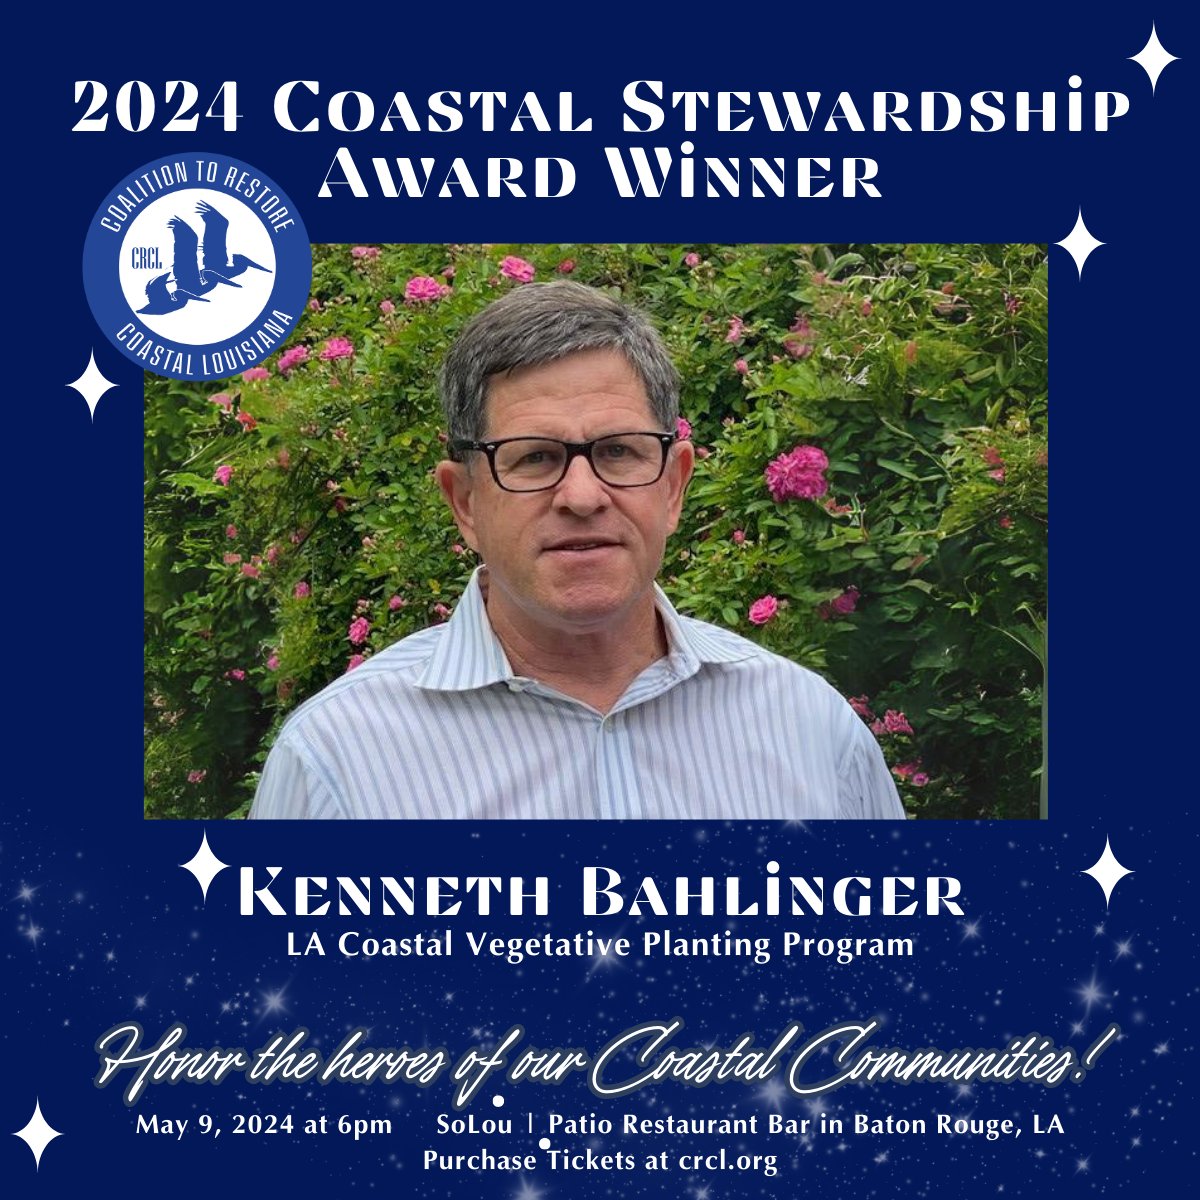 Meet the Kenneth Bahlinger, 2024 Coastal Stewardship Award winner! Coastal Stewardship Award winners will be recognized at the 2024 Coastal Stewardship Awards event May 9 at SoLou in Baton Rouge. Purchase tickets: crcl.org/program/coasta…